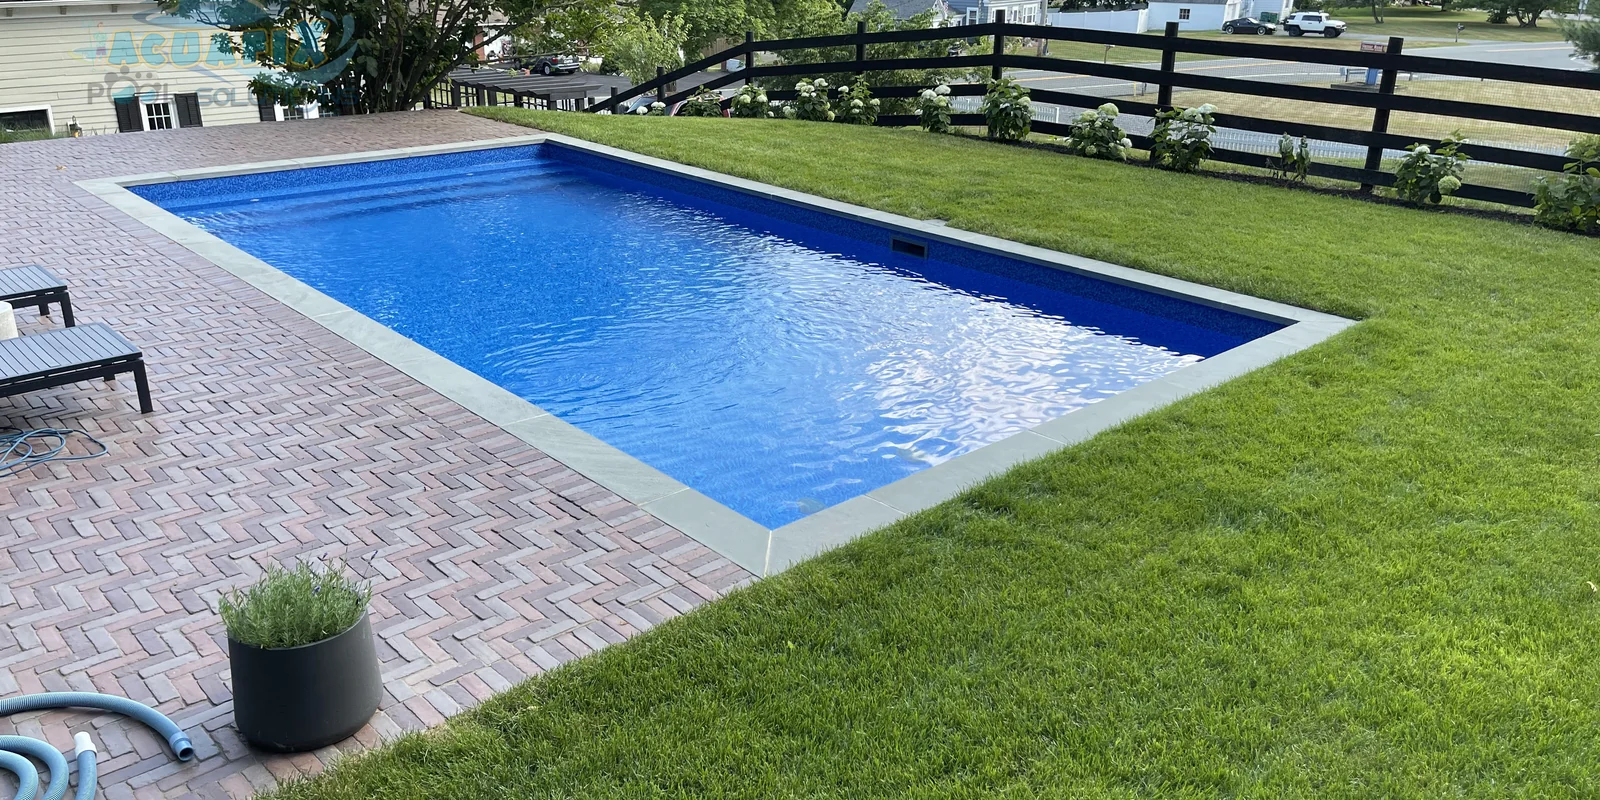 The Solution For Your Pool Needs